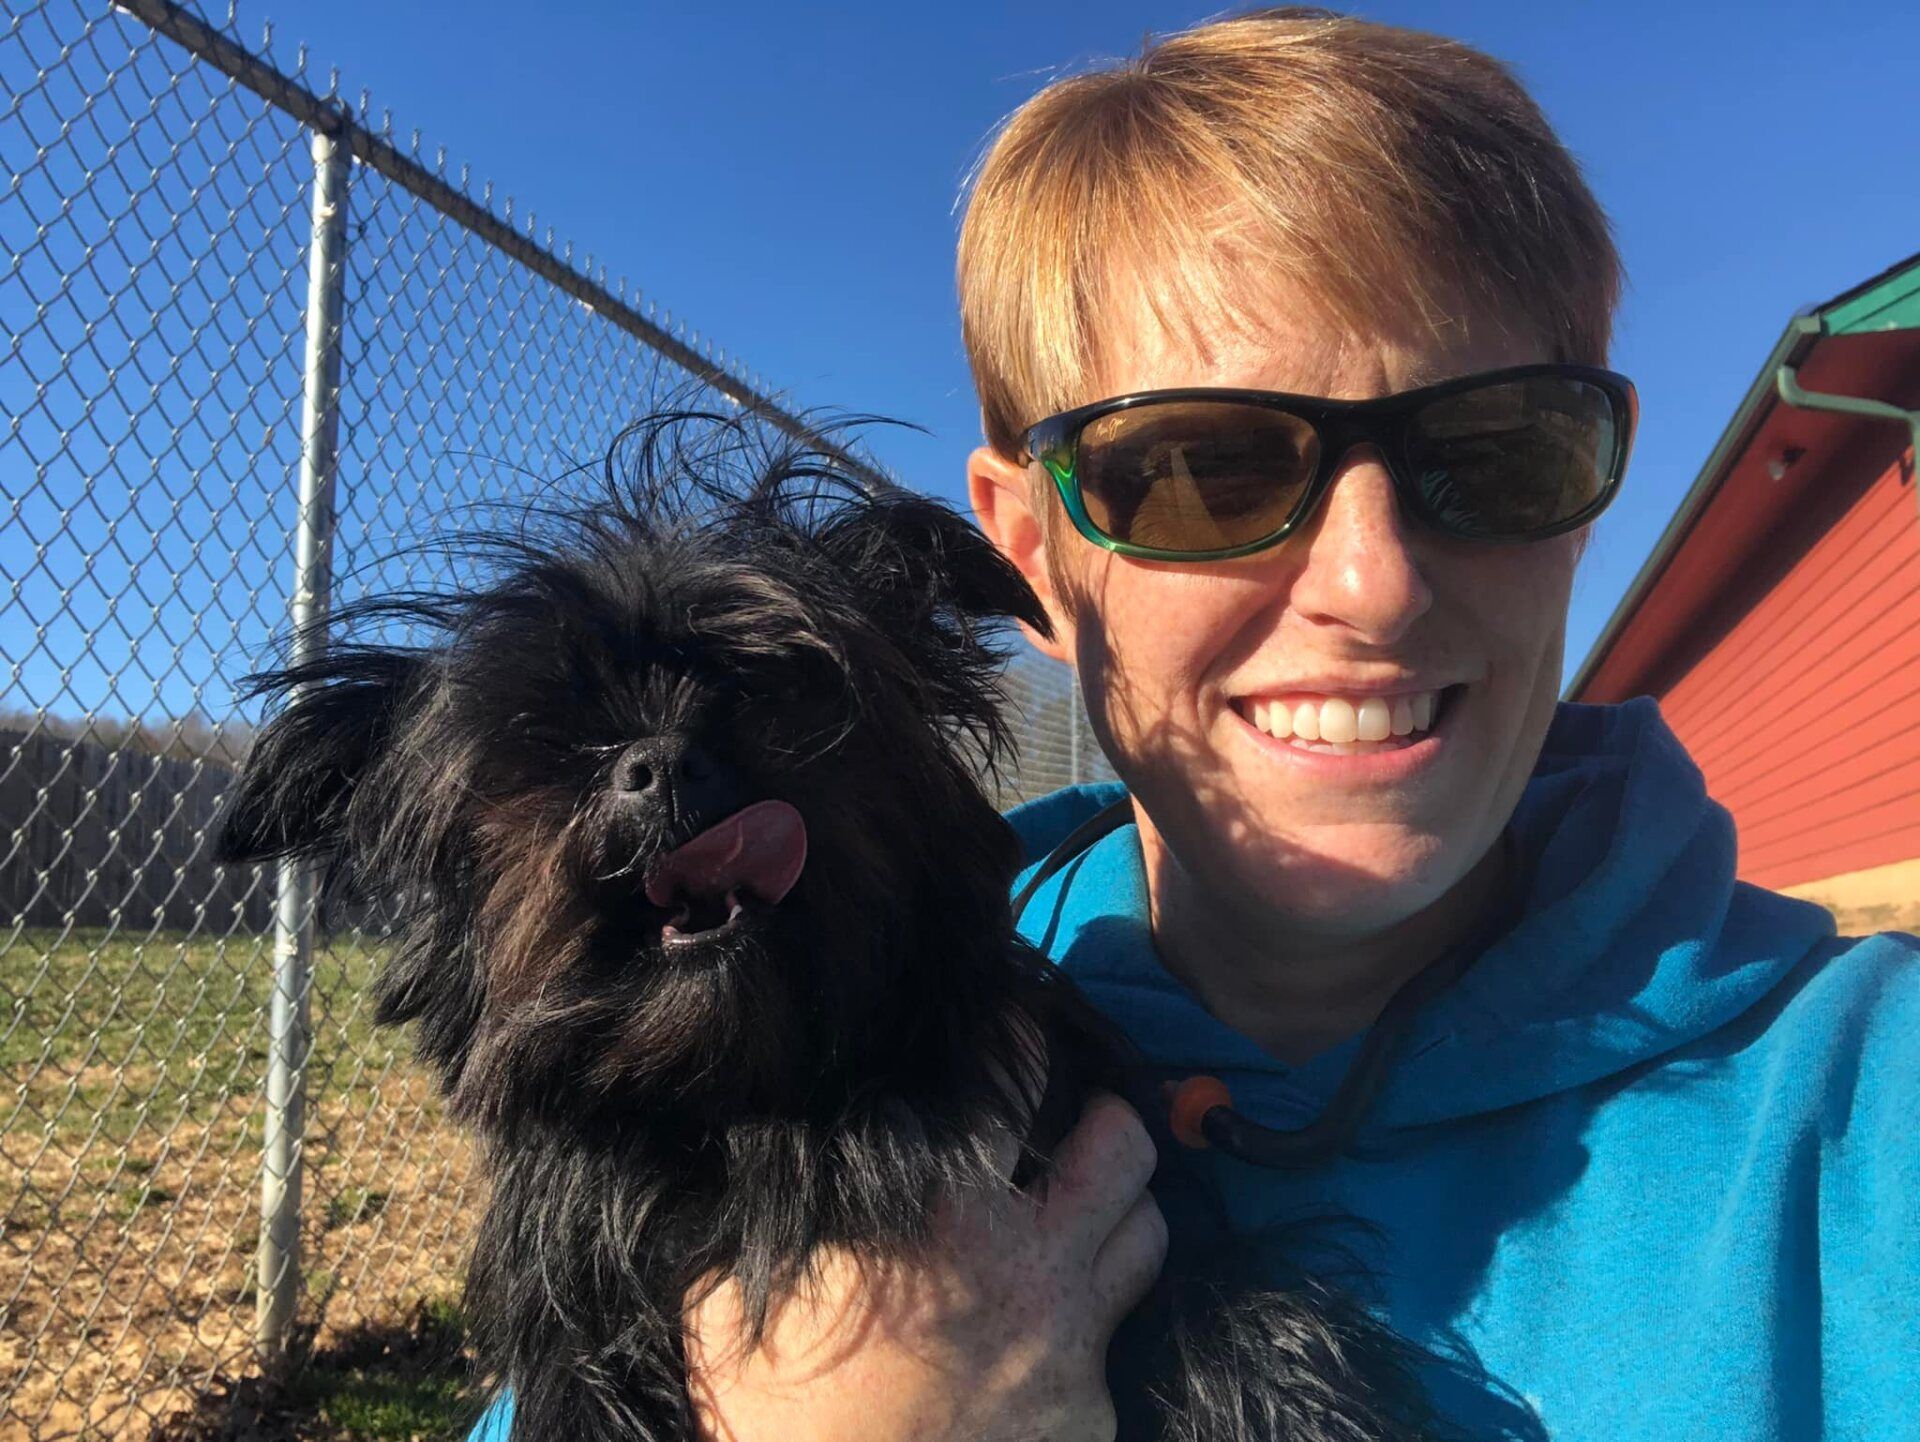 A woman wearing sunglasses is holding a small black dog